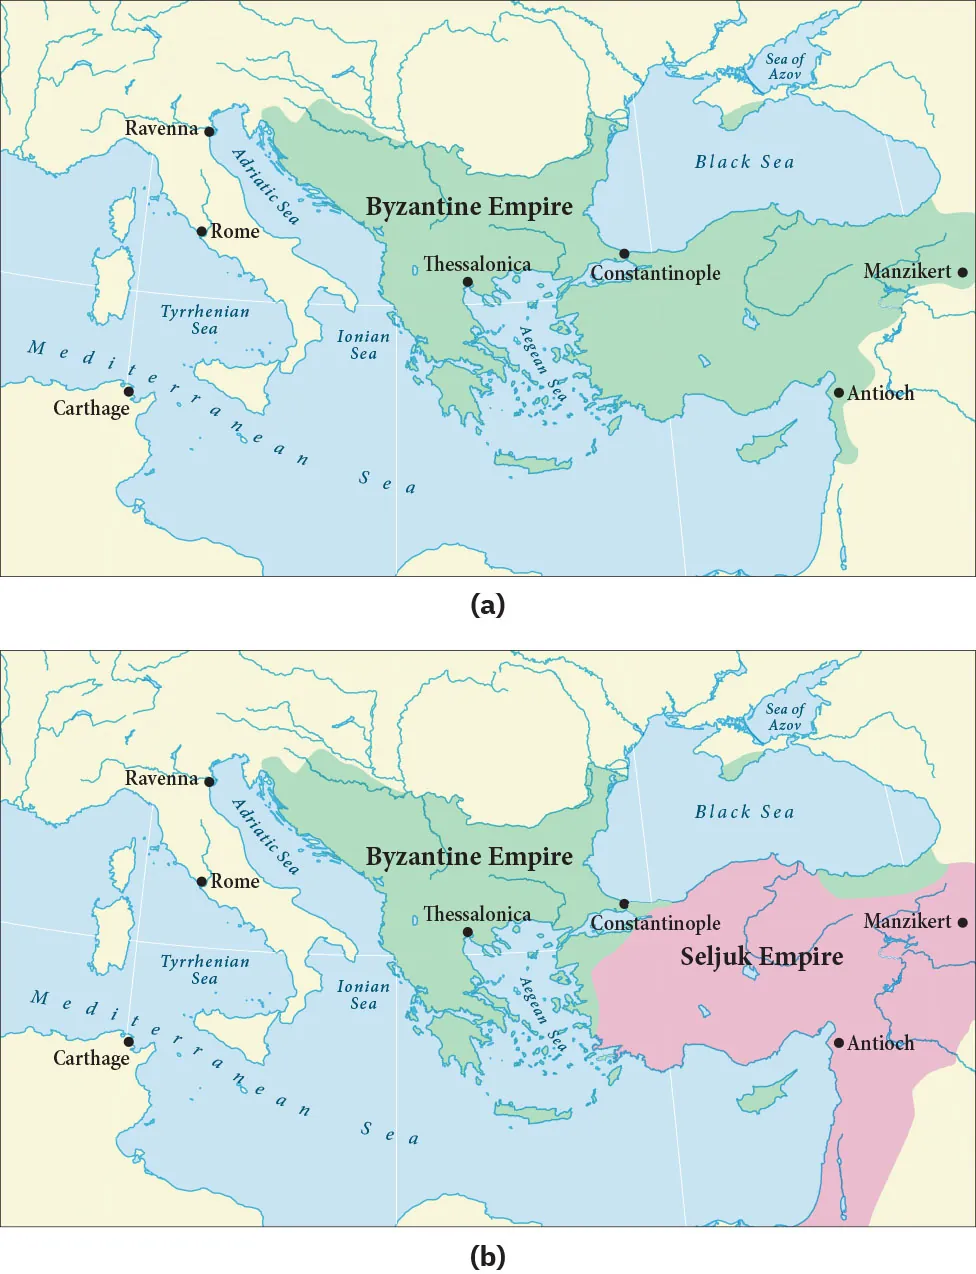 Two maps are shown with land highlighted beige while water is highlighted blue. White lines crisscross the waters. (a) The map shows the Mediterranean Sea in the south and southwest, the Adriatic Sea, the Tyrrhenian Sea, and the Ionian Sea labelled in the west, the Aegean Sea labelled in the middle, and the Sea of Azov and the Black Sea labelled in the northeast. A large area in the middle of the map is highlighted green as well as an oval section in the middle of the map at the east. A small area at the north of the Black Sea is also green. This green indicates “Byzantine Empire.” Cities labelled within this area are: Thessalonica, Constantinople, Manzikert, and Antioch. Cities labelled outside the green area include: Ravenna, Rome, and Carthage. (b) The map shows the Mediterranean Sea in the south and southwest with the Adriatic Sea, the Tyrrhenian Sea, and the Ionian Sea labelled in the west, the Aegean Sea labelled in the middle, and the Sea of Azov and the Black Sea labelled in the northeast. A large area in the middle of the map is highlighted green and labelled “Byzantine Empire” with the cities of Thessalonica and Constantinople labelled within. A small area at the north of the Black Sea and at the southeast of the Black Sea is also highlighted green. An upside down “V” shaped section in the eastern middle of the map at the east is highlighted pink and labelled “Seljuk Empire.” The cities of Manzikert, and Antioch are labelled within this pink area. Cities labelled outside the highlighted areas include: Ravenna, Rome, and Carthage.